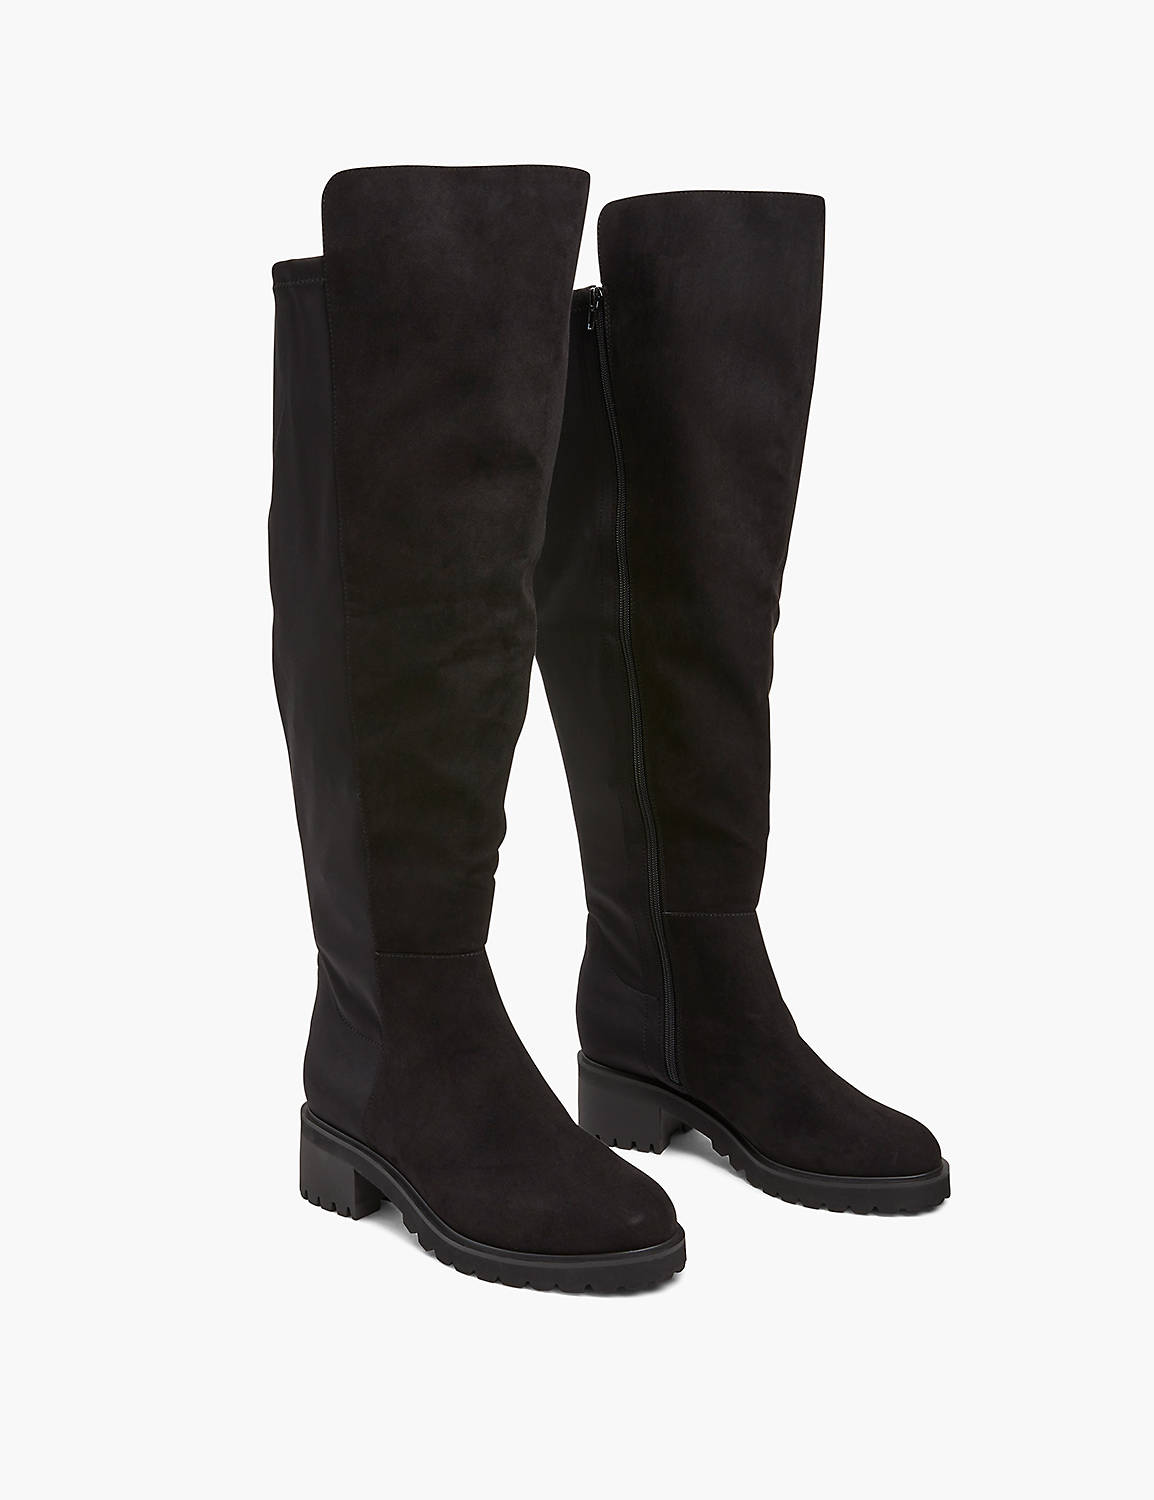 lane bryant dream cloud faux-microsuede over-the-knee boot 9w black